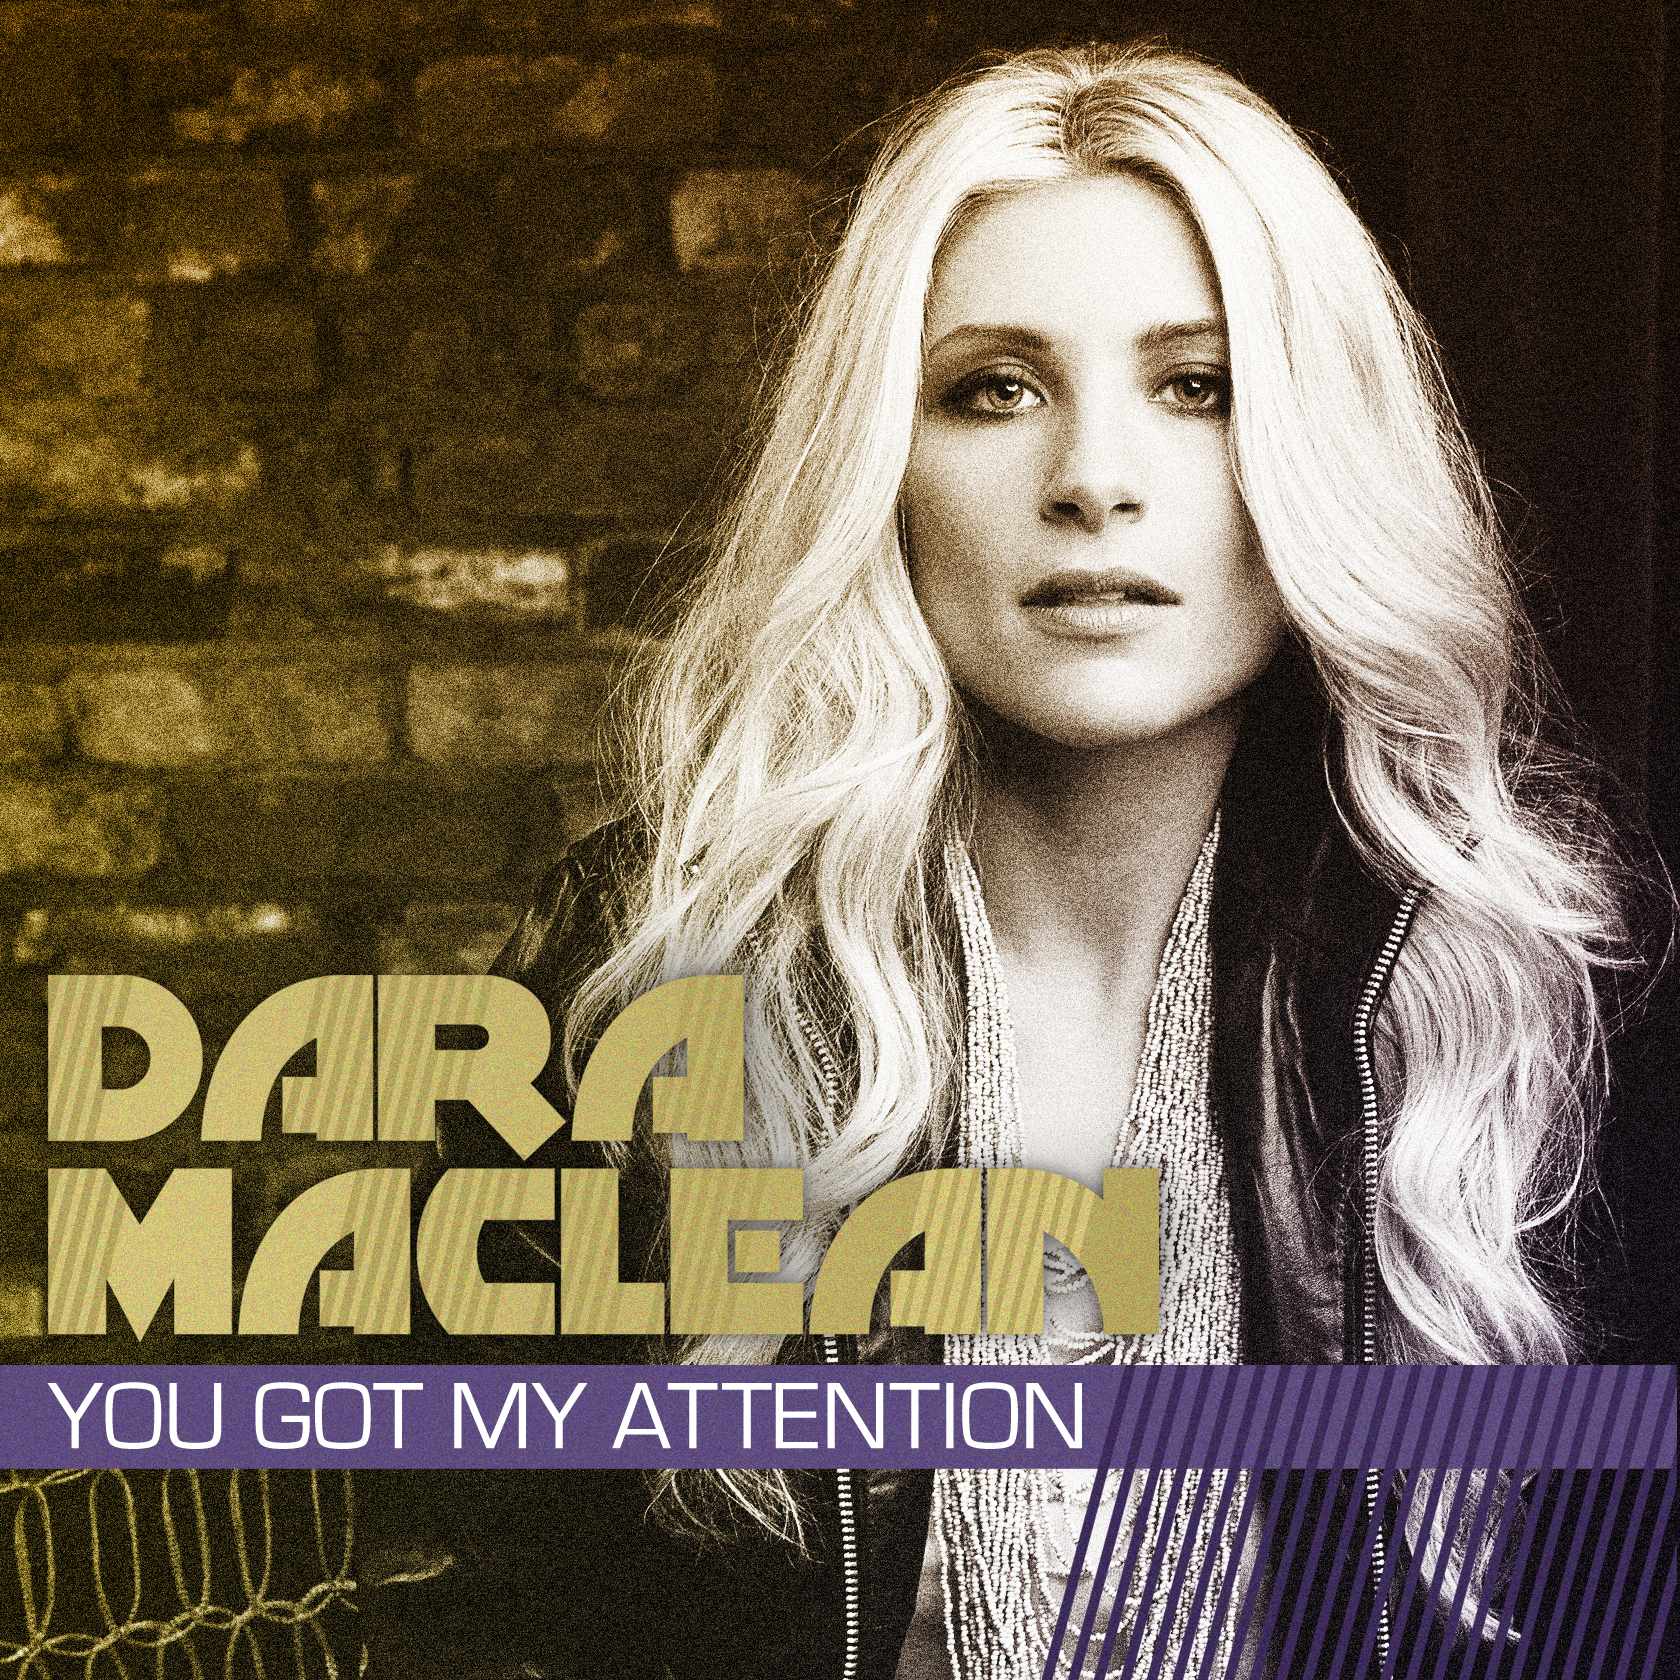 Dara Maclean, “You Got My Attention”